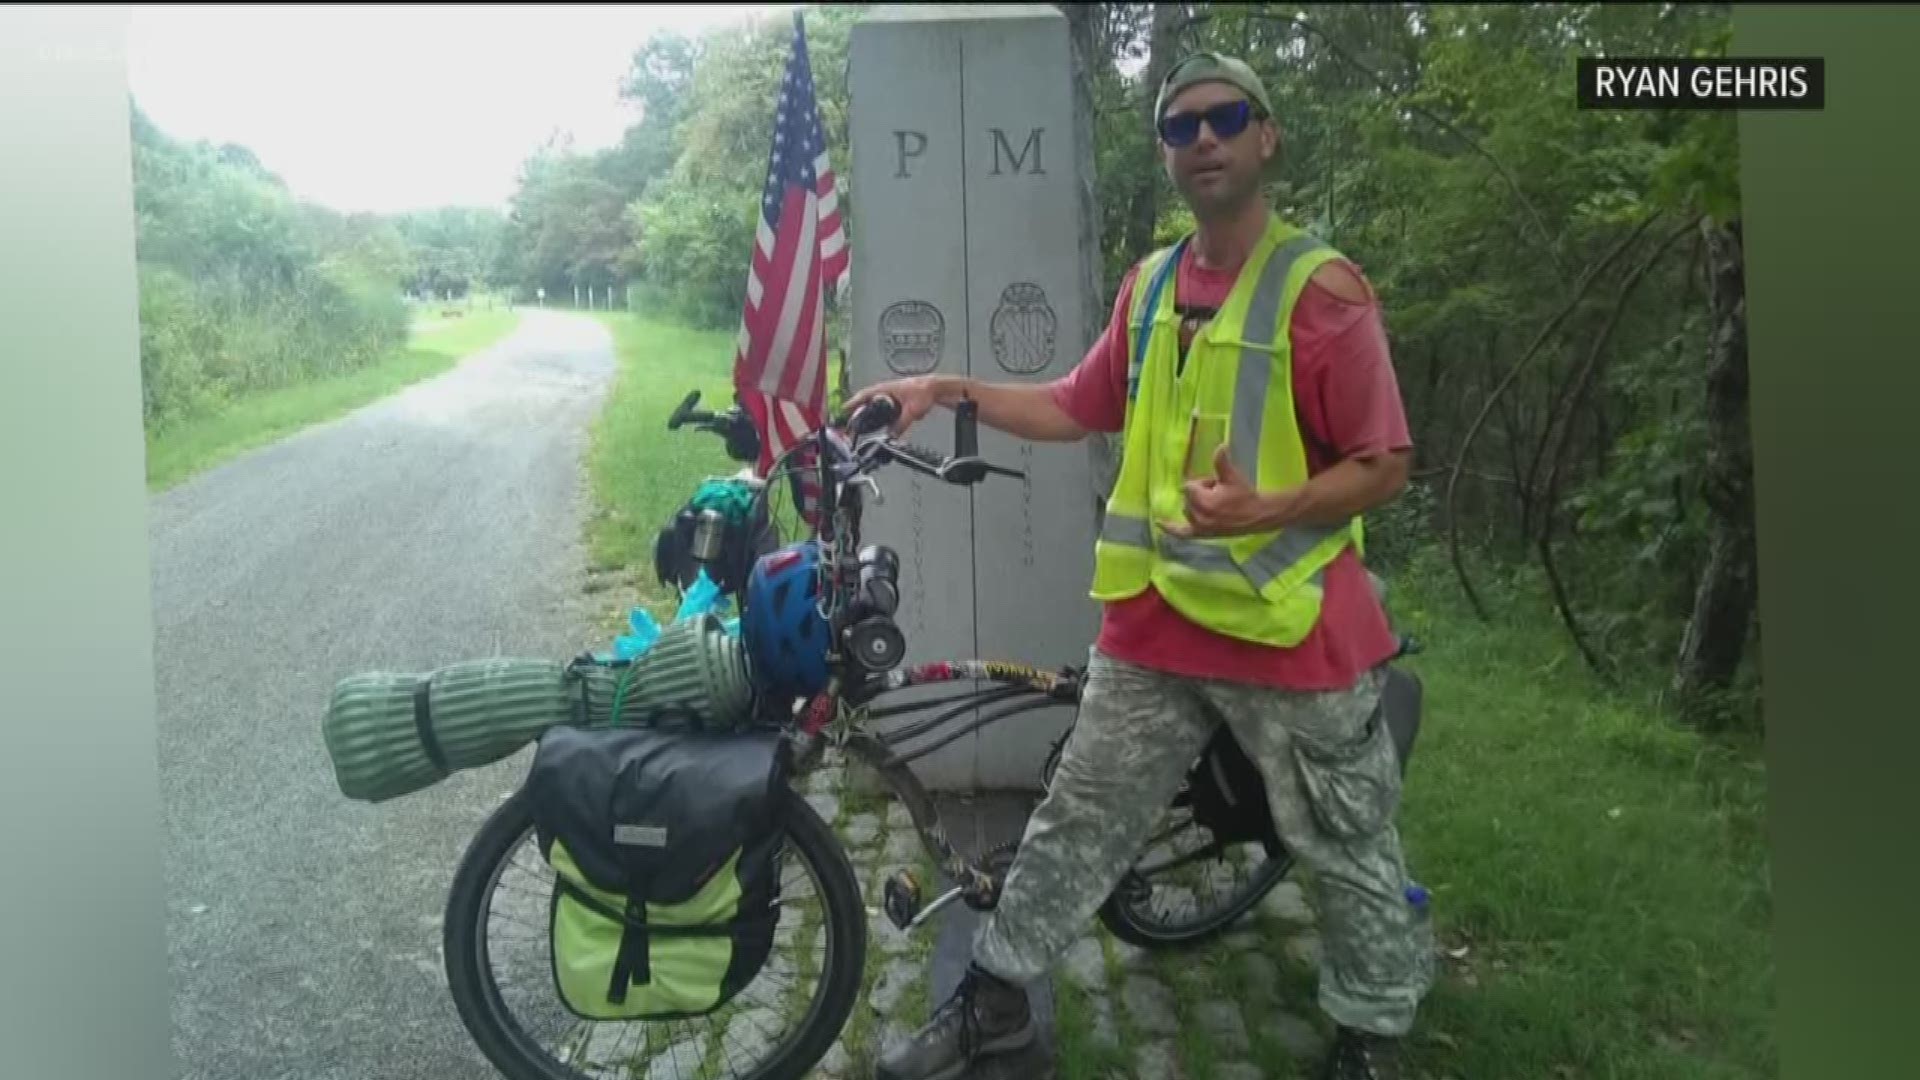 An Ocean Beach man who rode his bicycle across the country to raise money for Gold Star families is asking the public for help after his beach cruiser he took on that cross-country trip was stolen.